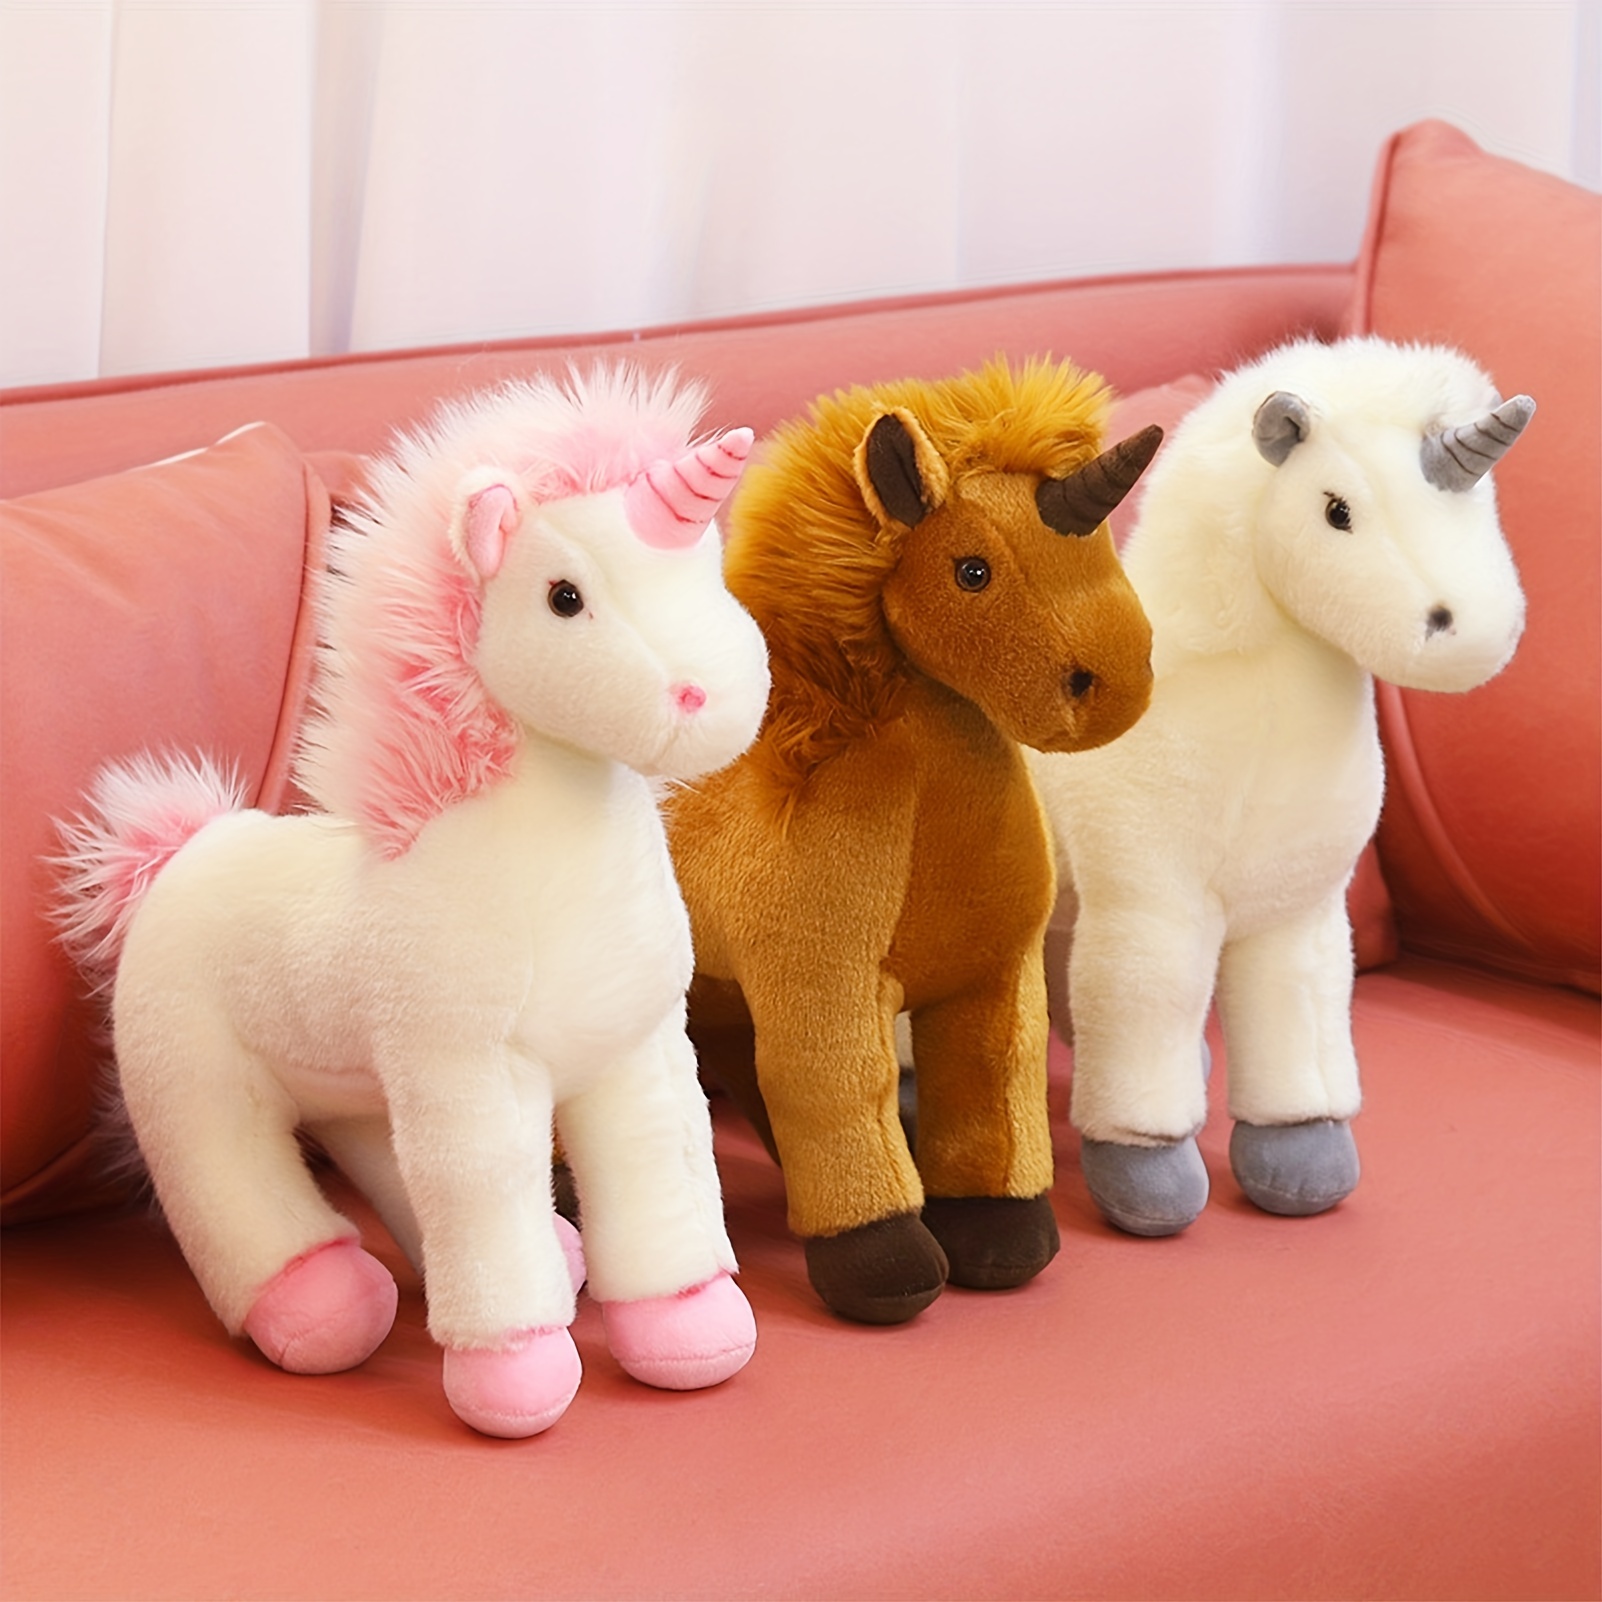 13 Adorable Unicorn Gifts for Girls